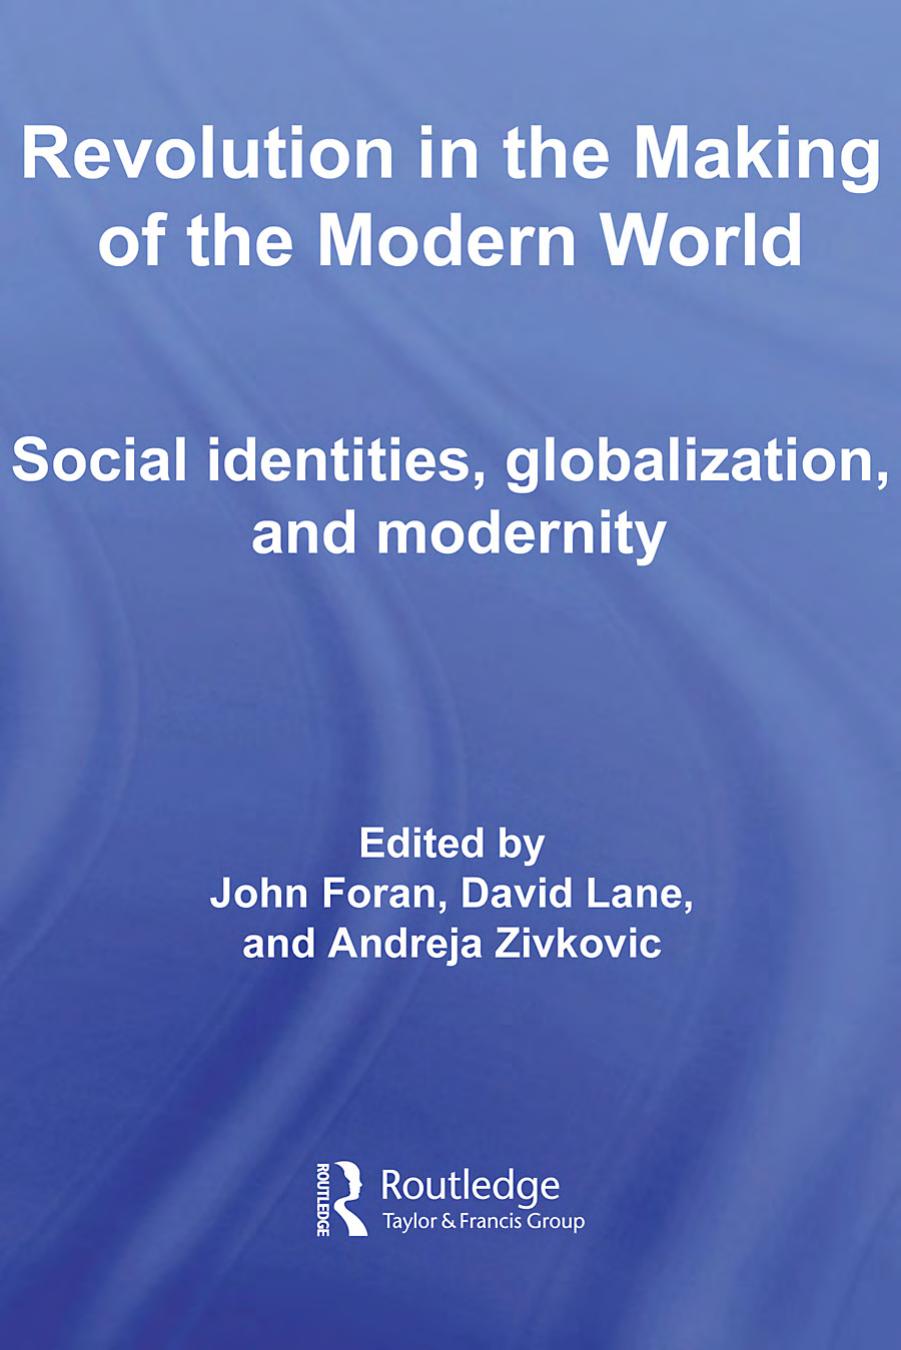 Revolution in the Making of the Modern World: Social Identities, Globalization, and Modernity